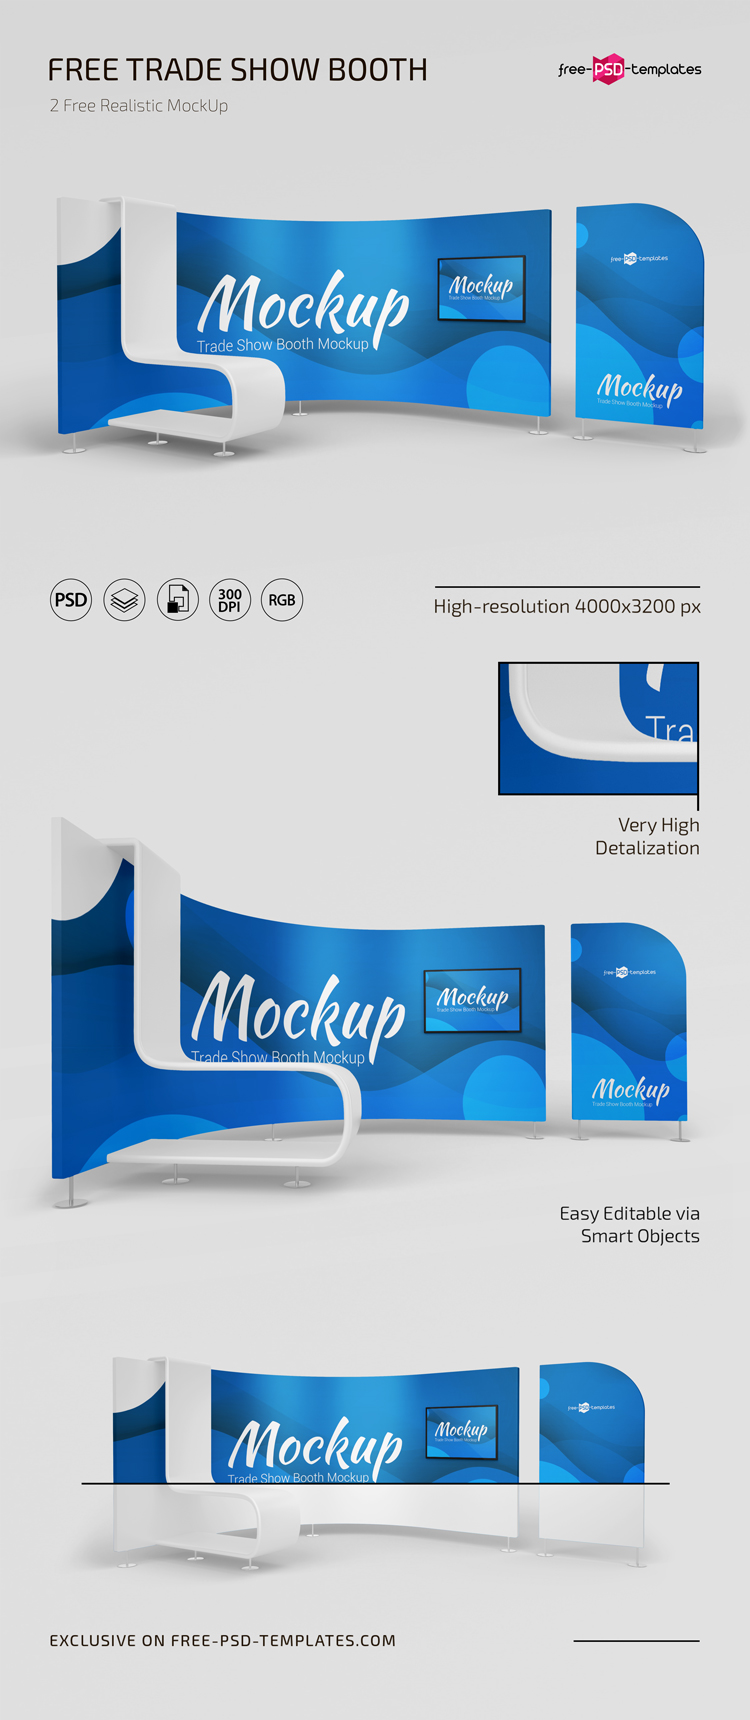 Download Free Trade Show Booth Mockup In Psd Free Psd Templates